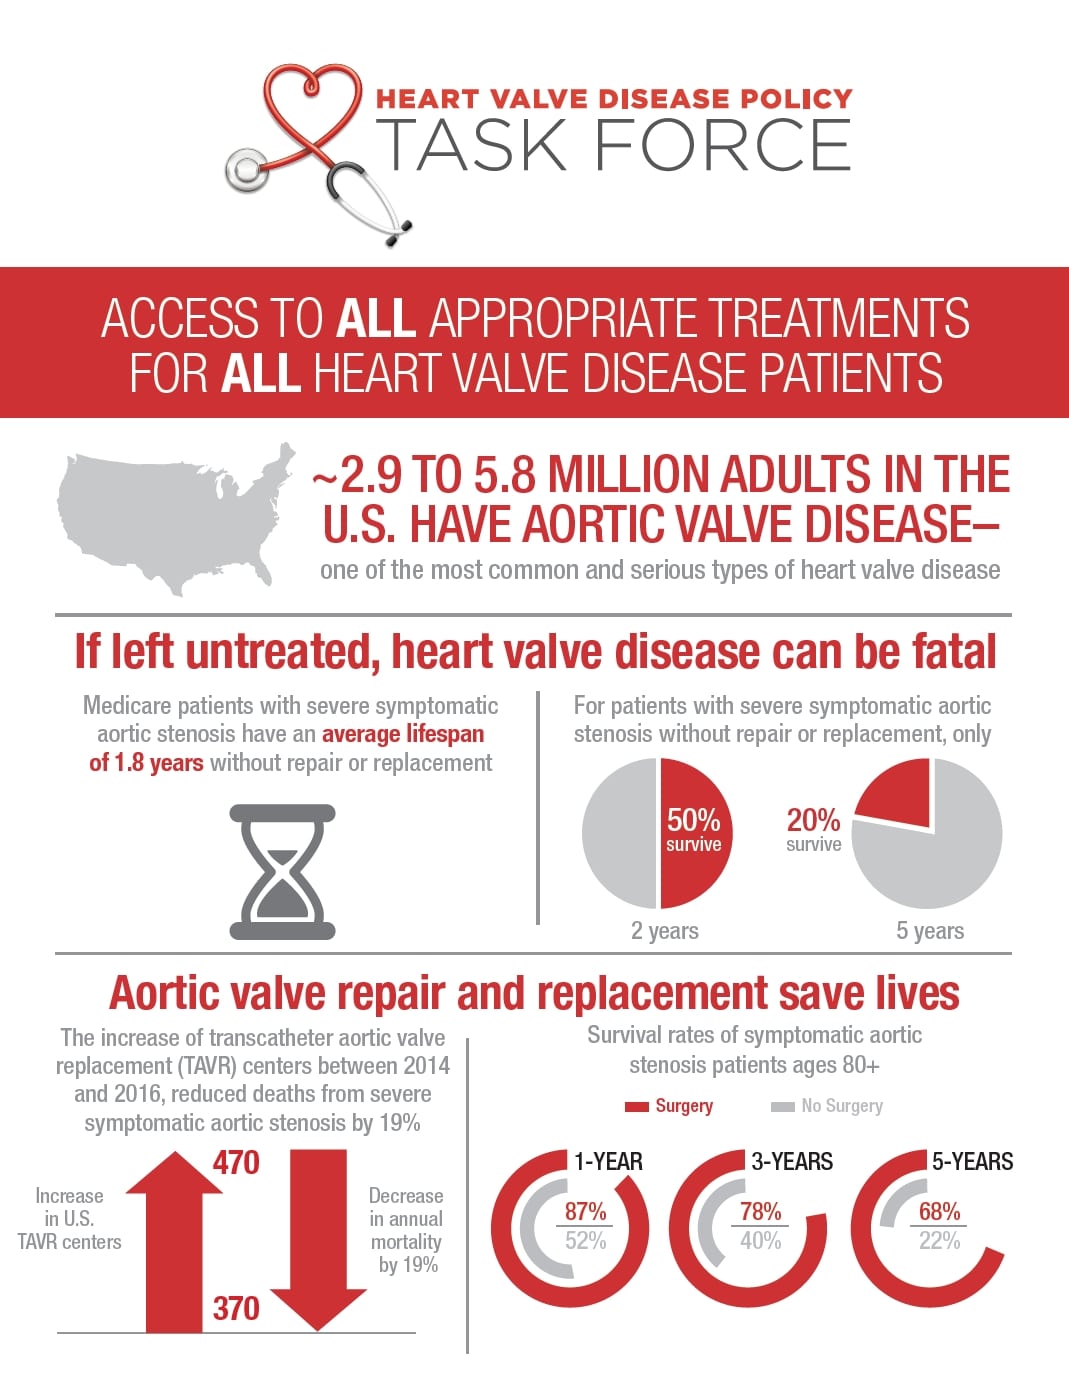 Infographic from the Heart Valve Disease Policy Task Force on heart valve disease outcomes.